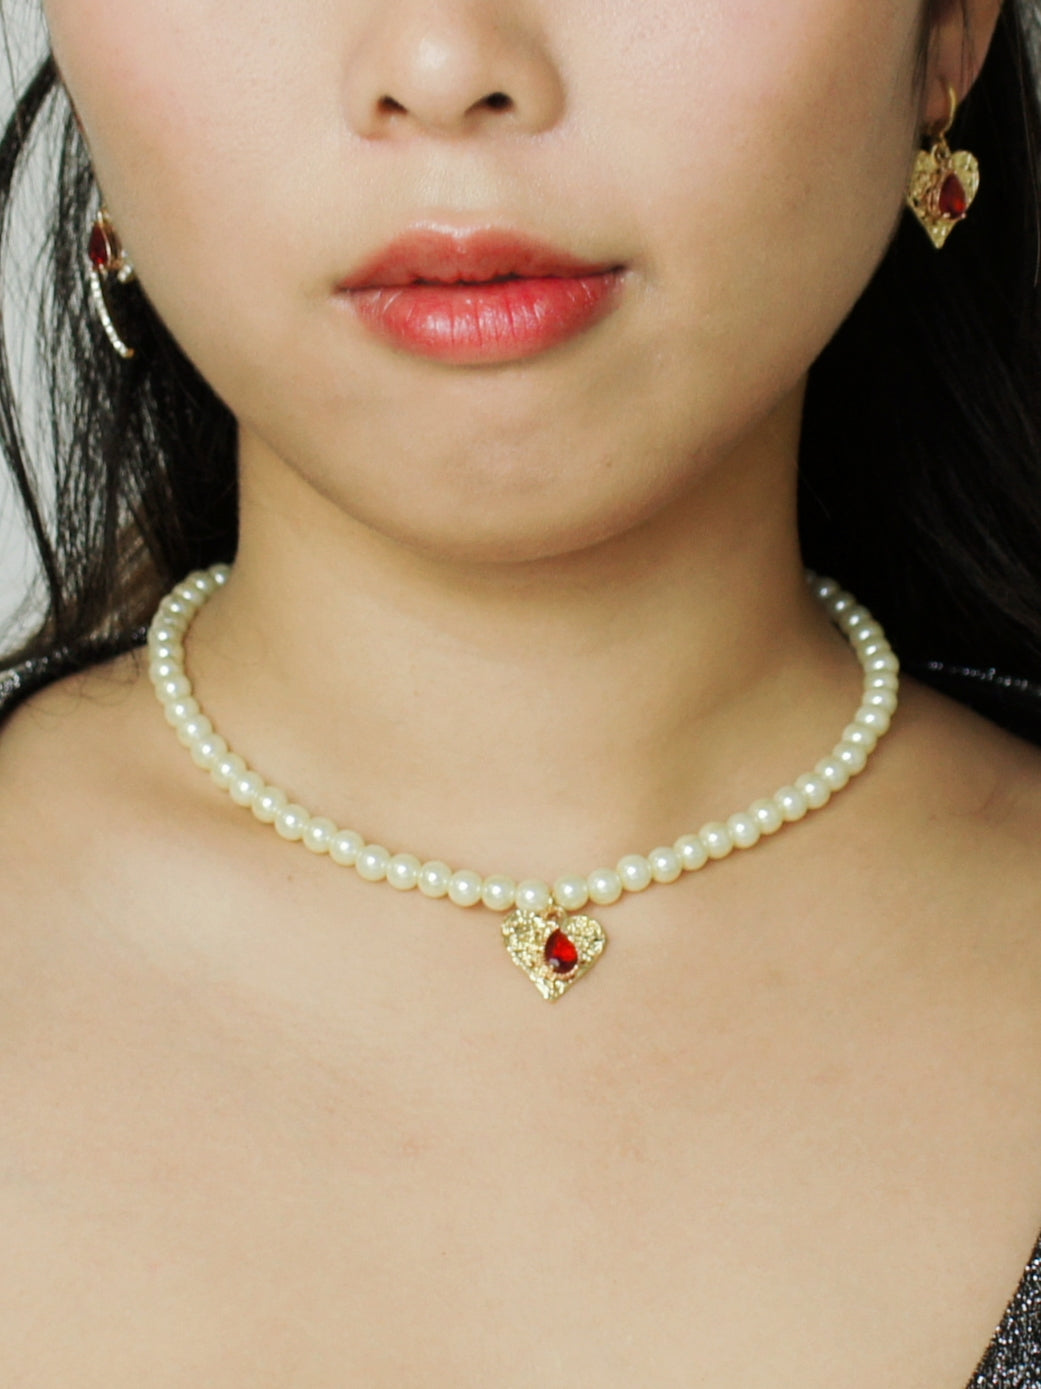 My Precious Faux Pearl Collar Necklace with Crystal and Textured Heart Pendant